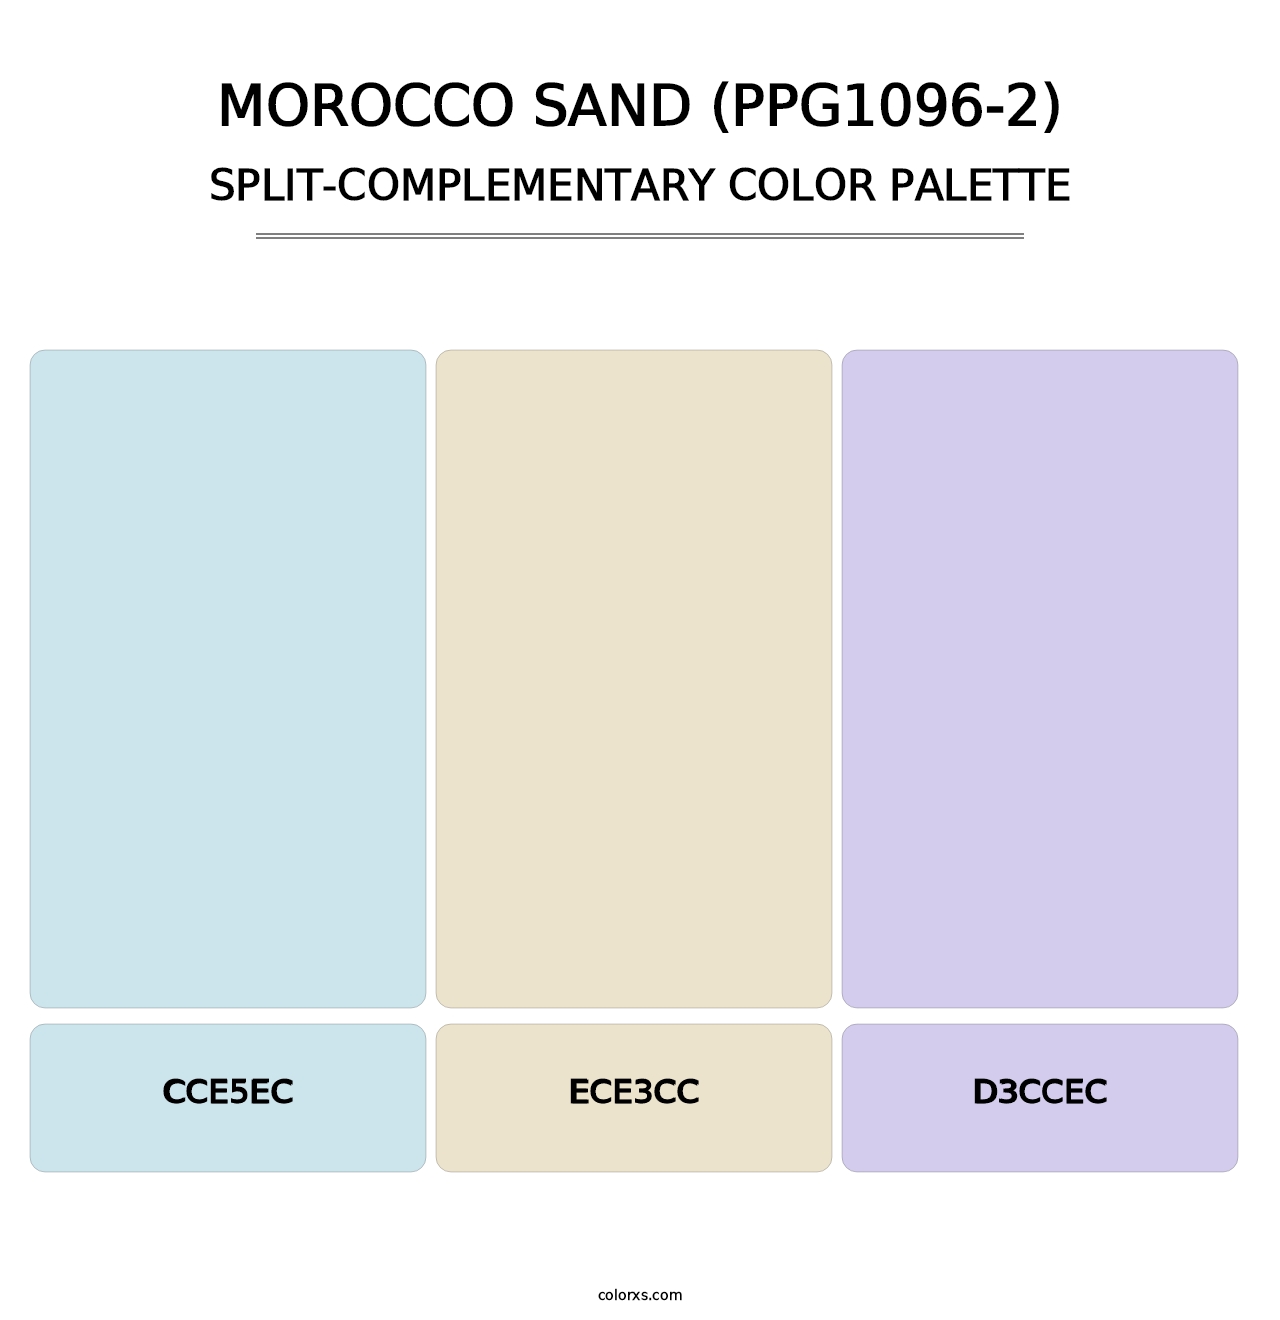 Morocco Sand (PPG1096-2) - Split-Complementary Color Palette